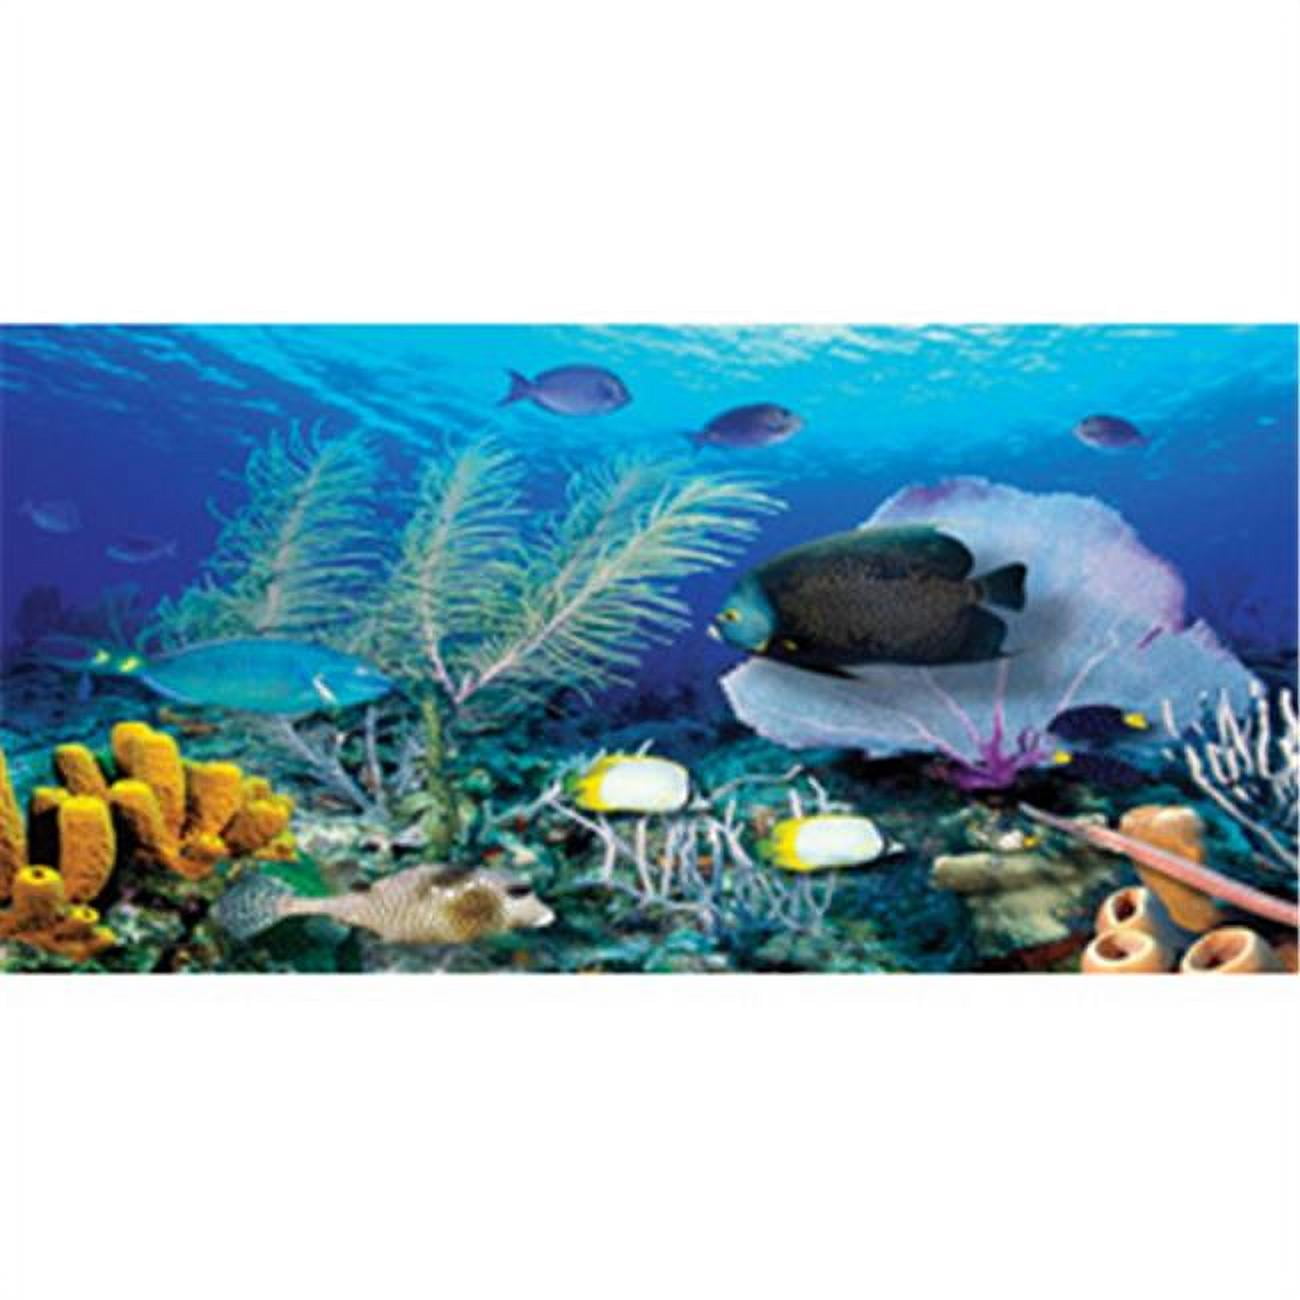 Details about   Magnet Sticker Refrigerator removable Decal Landscapes Coral reef 